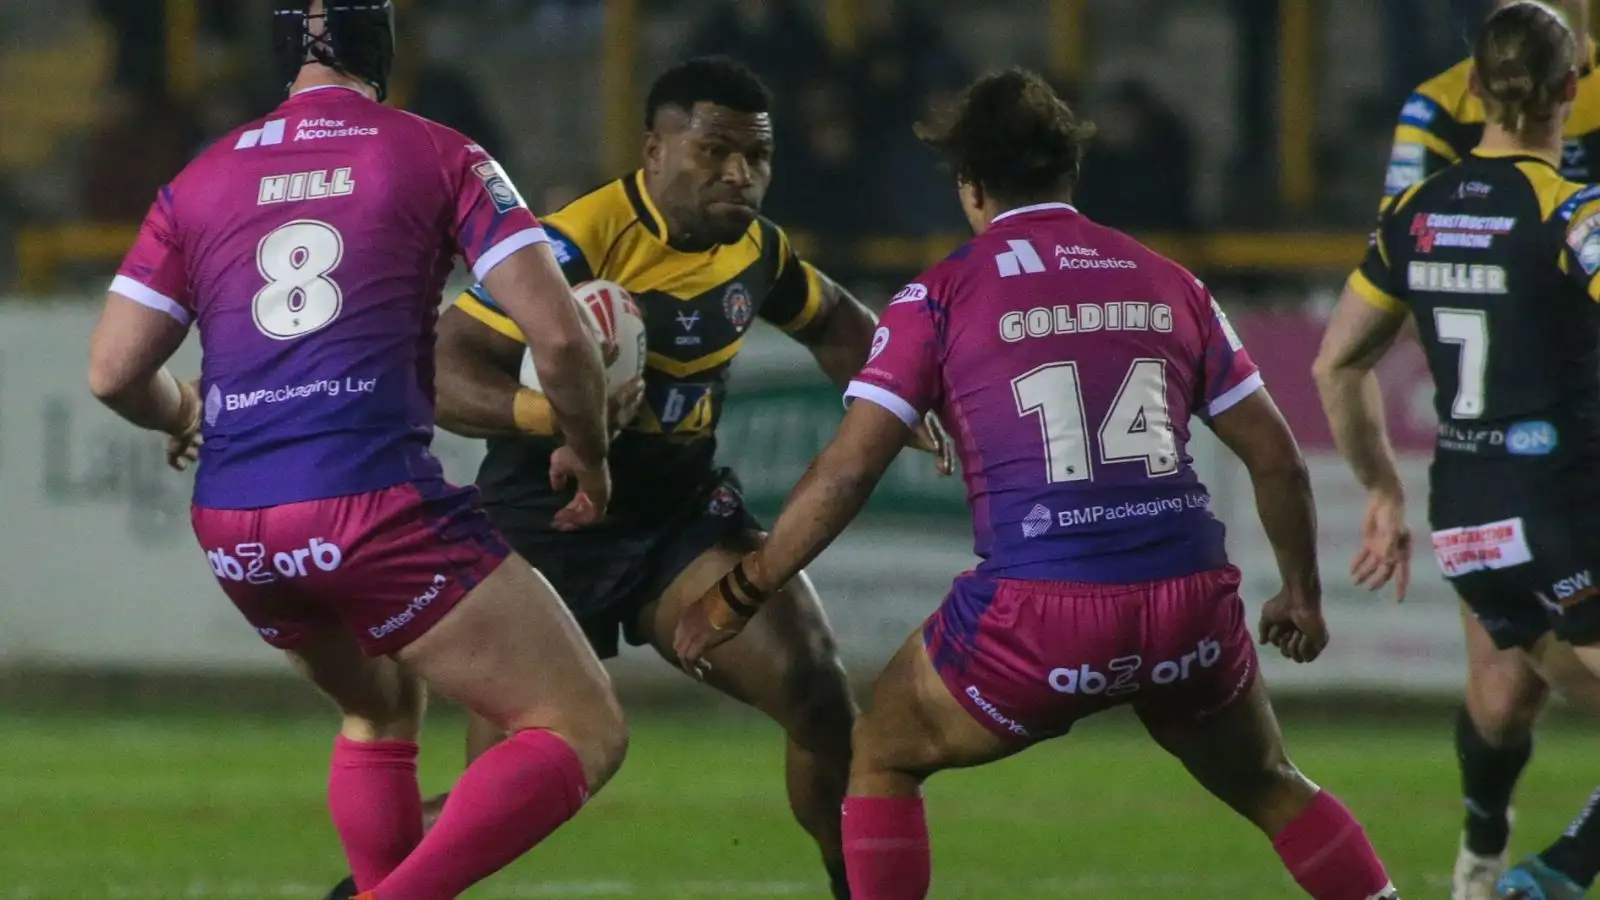 Castleford Tigers forward facing lengthy ban as three players charged following Challenge Cup